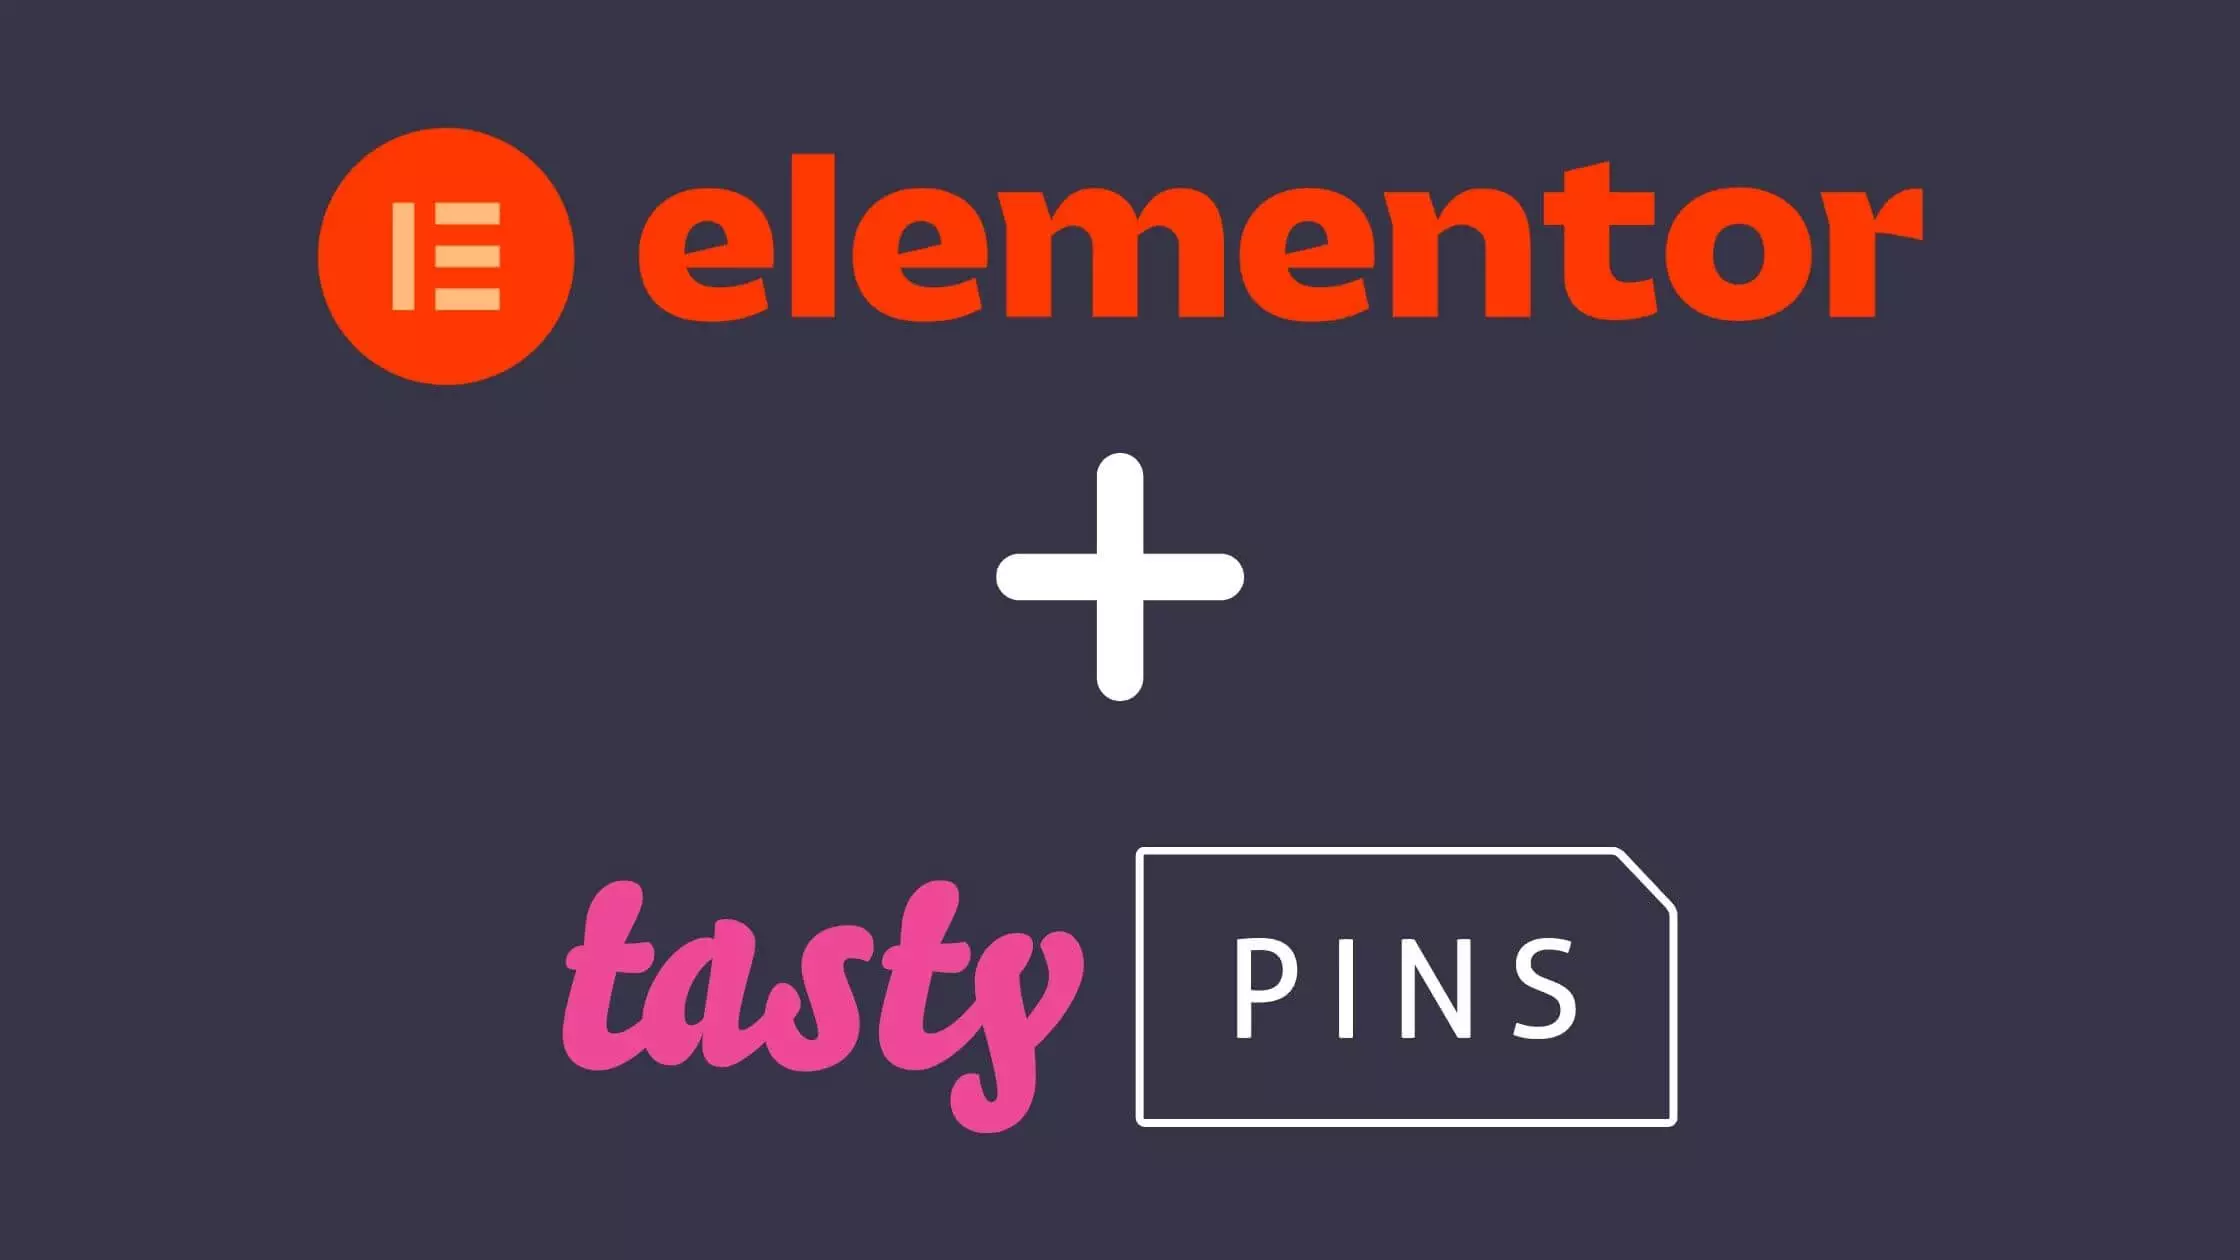 Does Tasty Pins work with Elementor Page Builder - Tasty Pins and Elementor Compatibility